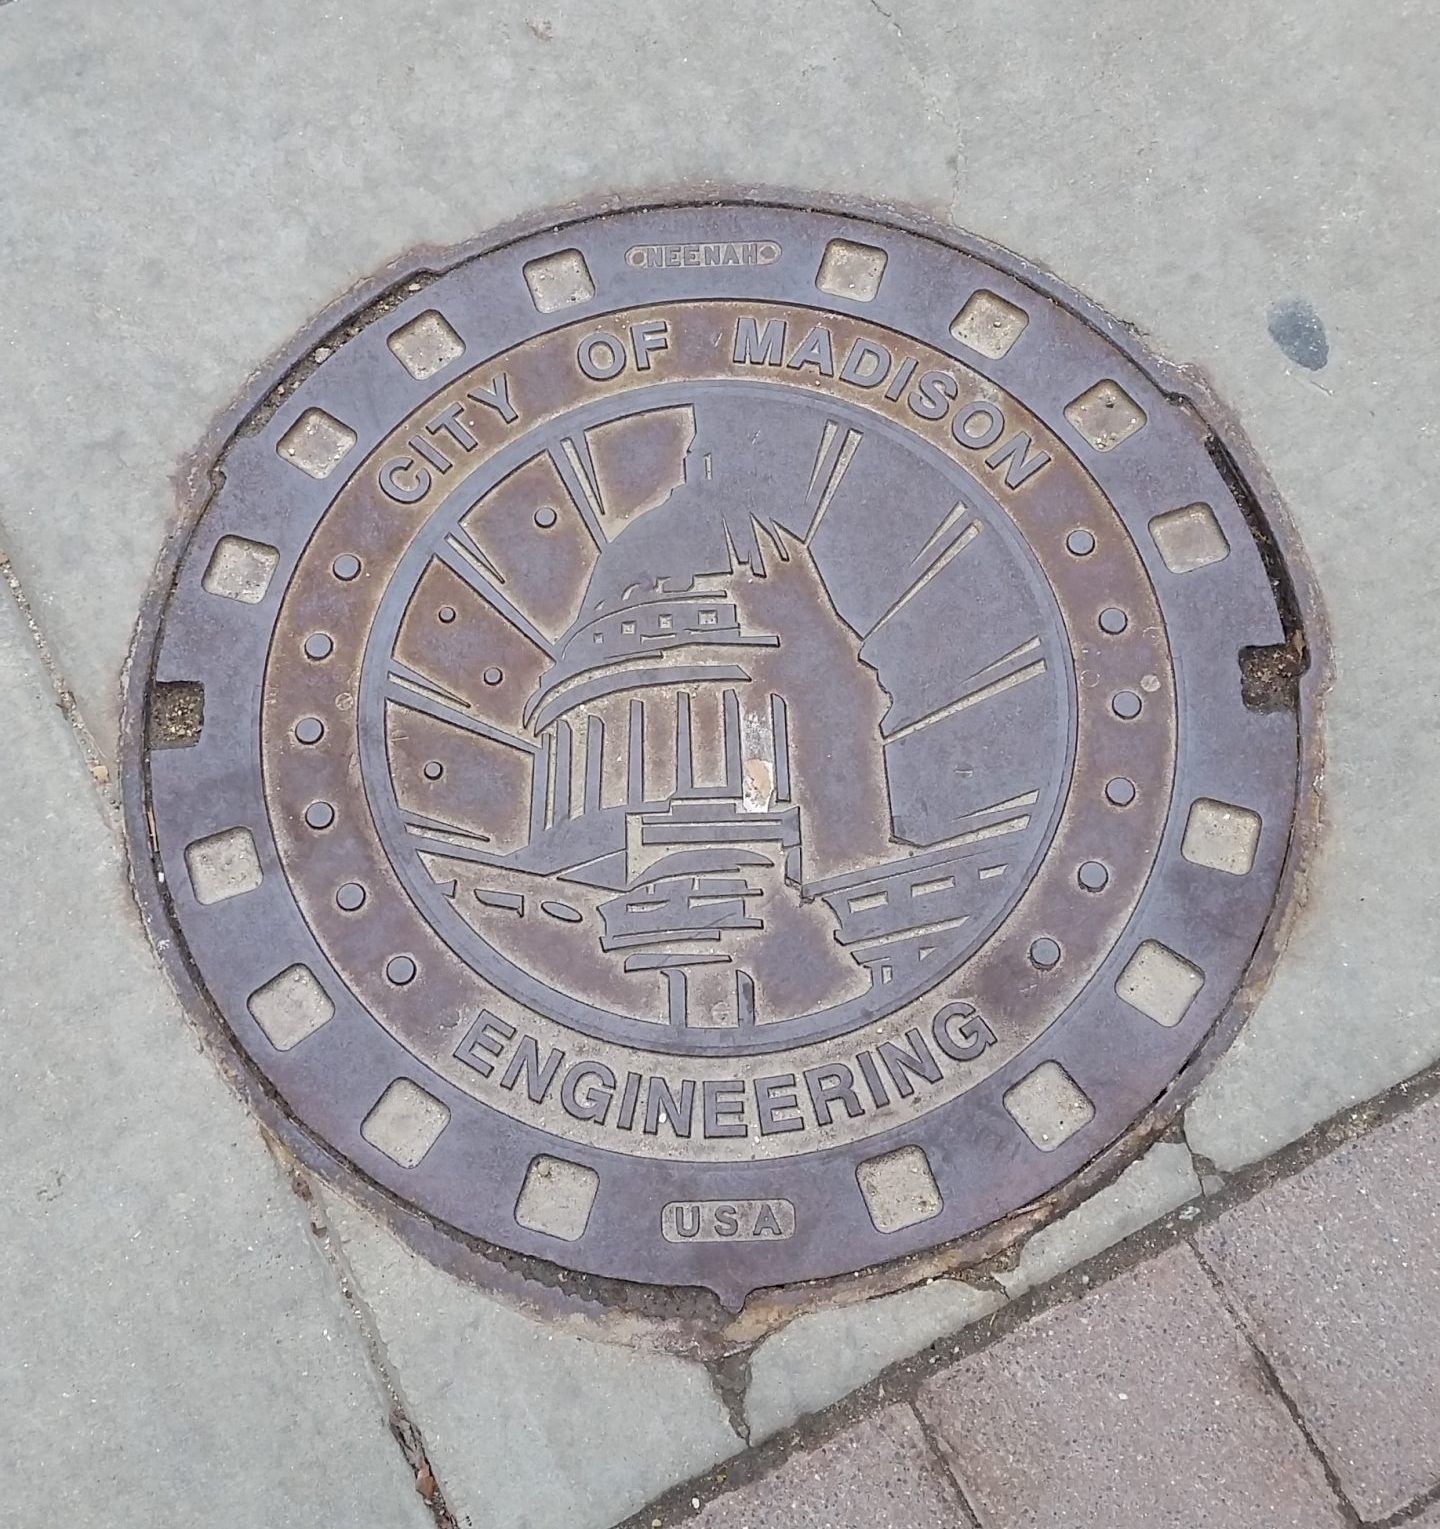 Read more about the article Manhole Cover Designs and Contemporary Aesthetics